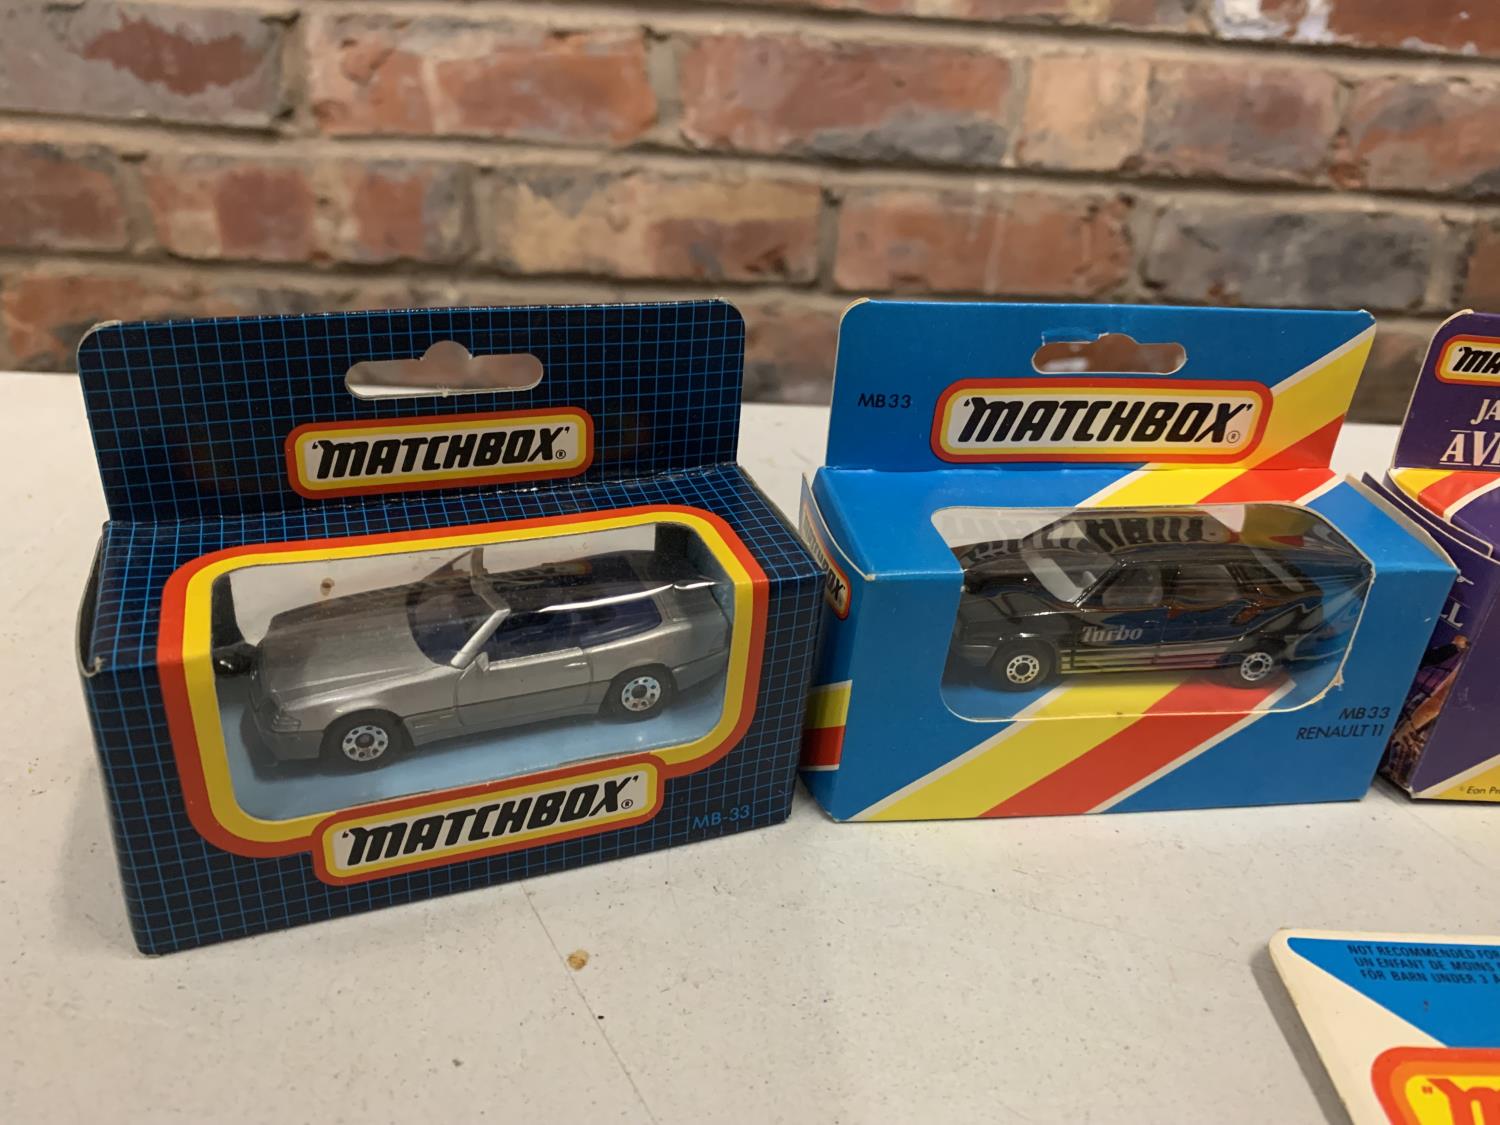 A COLLECTION OF BOXED AND UNBOXED MATCHBOX VEHICLES - ALL MODEL NUMBER 33 OF VARIOUS ERAS AND - Image 4 of 6